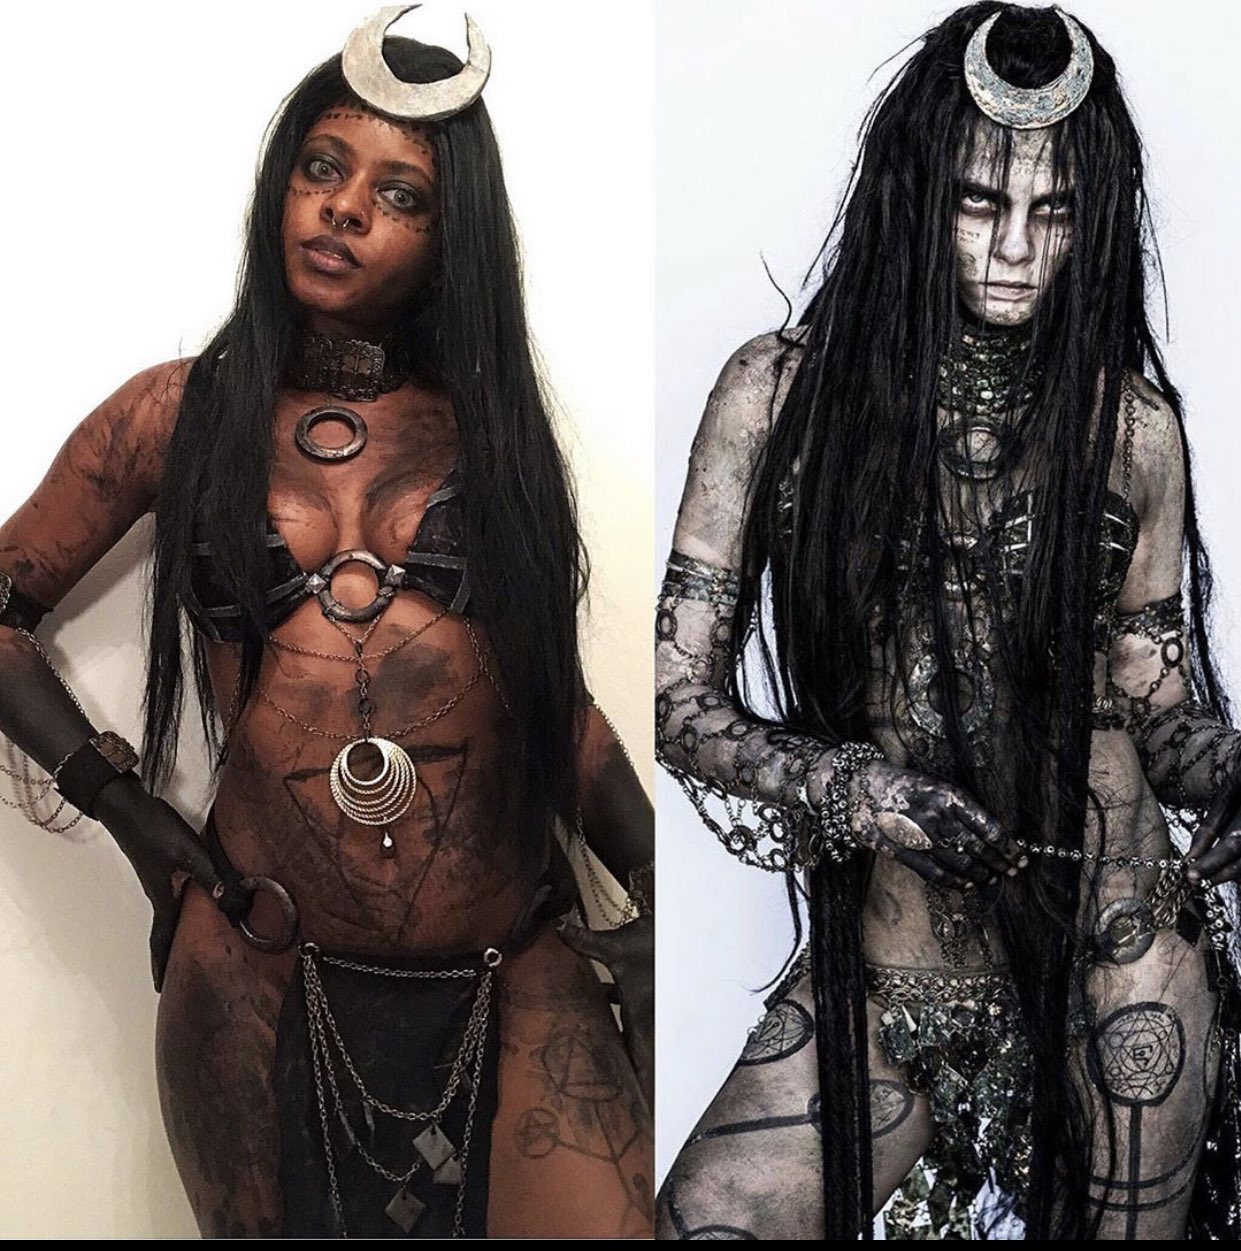 A side-by-side comparison of DeLa Doll's Enchantress cosplay next to the actual Enchantress character from the Suicide Squad movie